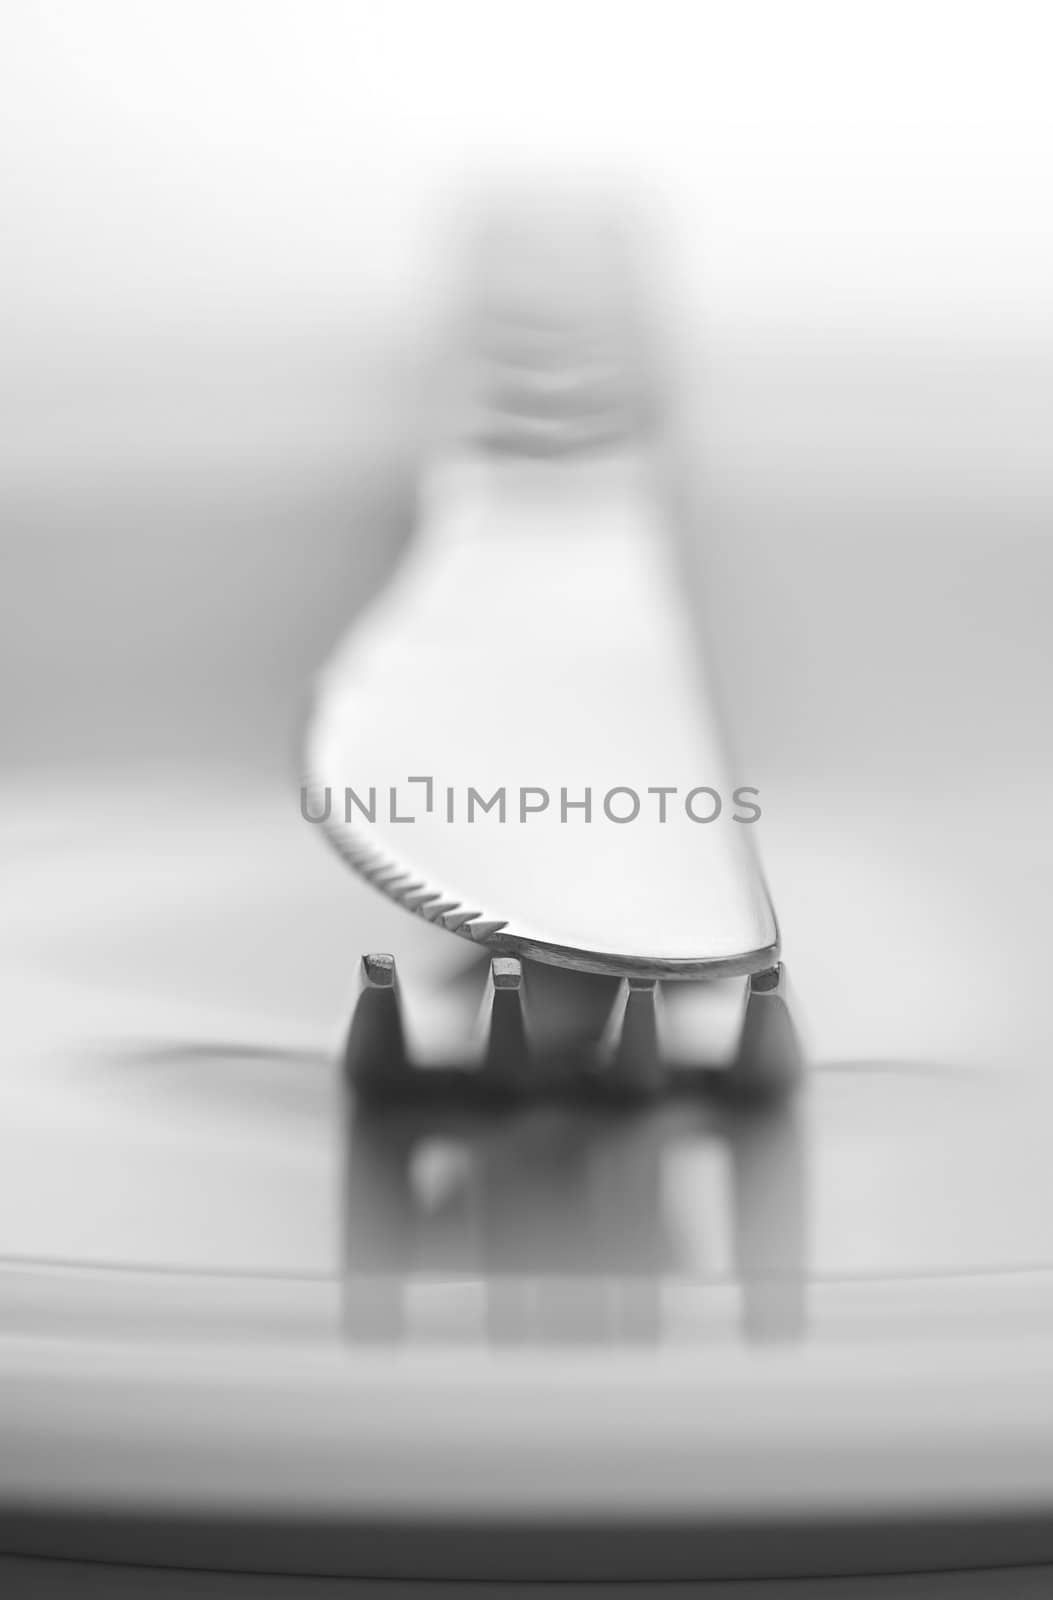 Fork and knife on white background in close-up view. Soft-focus.